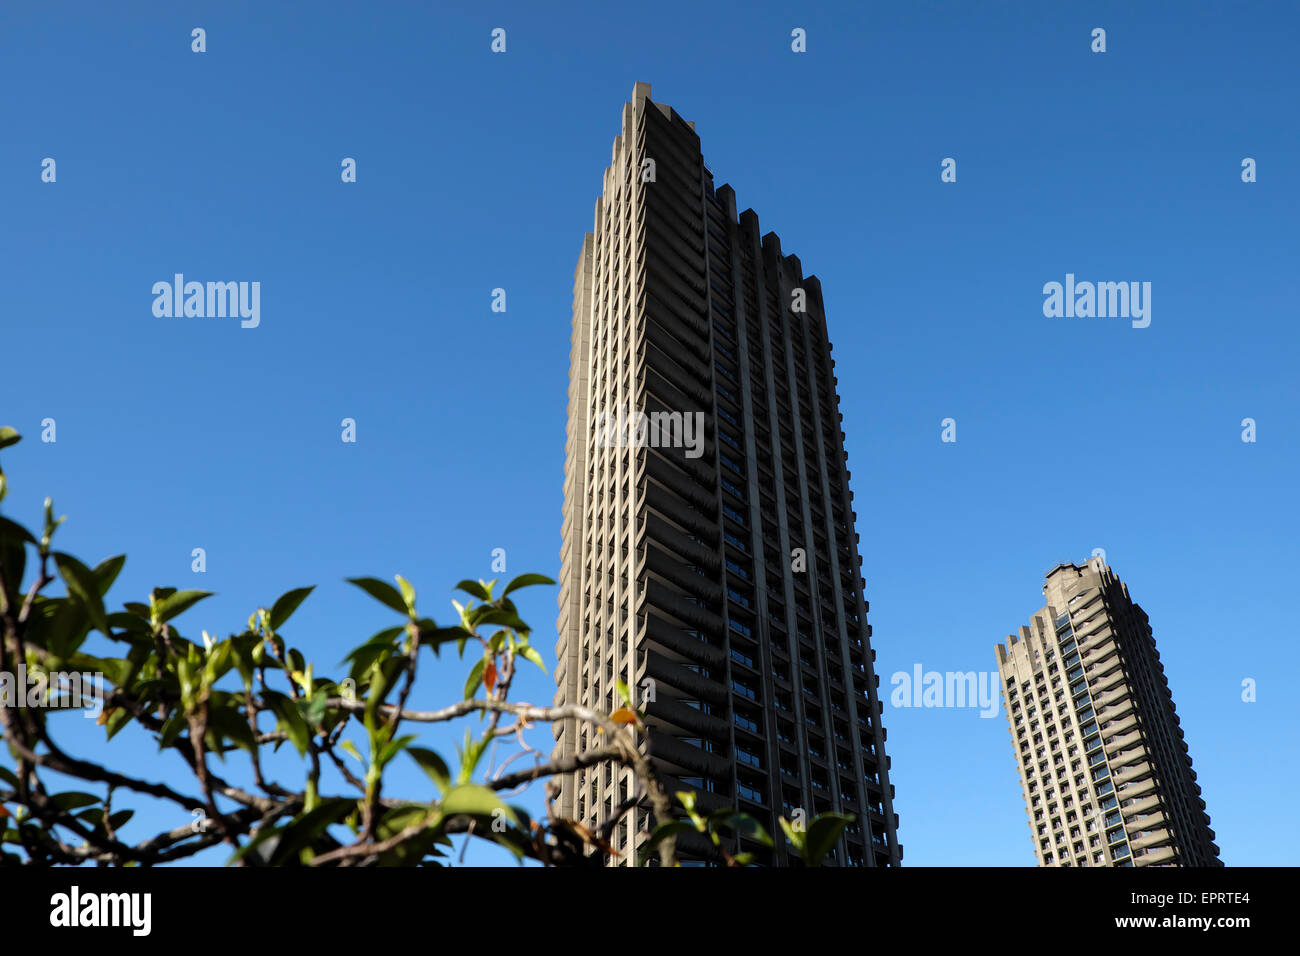 View of building tower with perennial plant from a balcony flat garden and Barbican Estate high rise luxury1960s modern architectecture apartment towers & clear blue sky in spring London EC2Y England UK  KATHY DEWITT Stock Photo